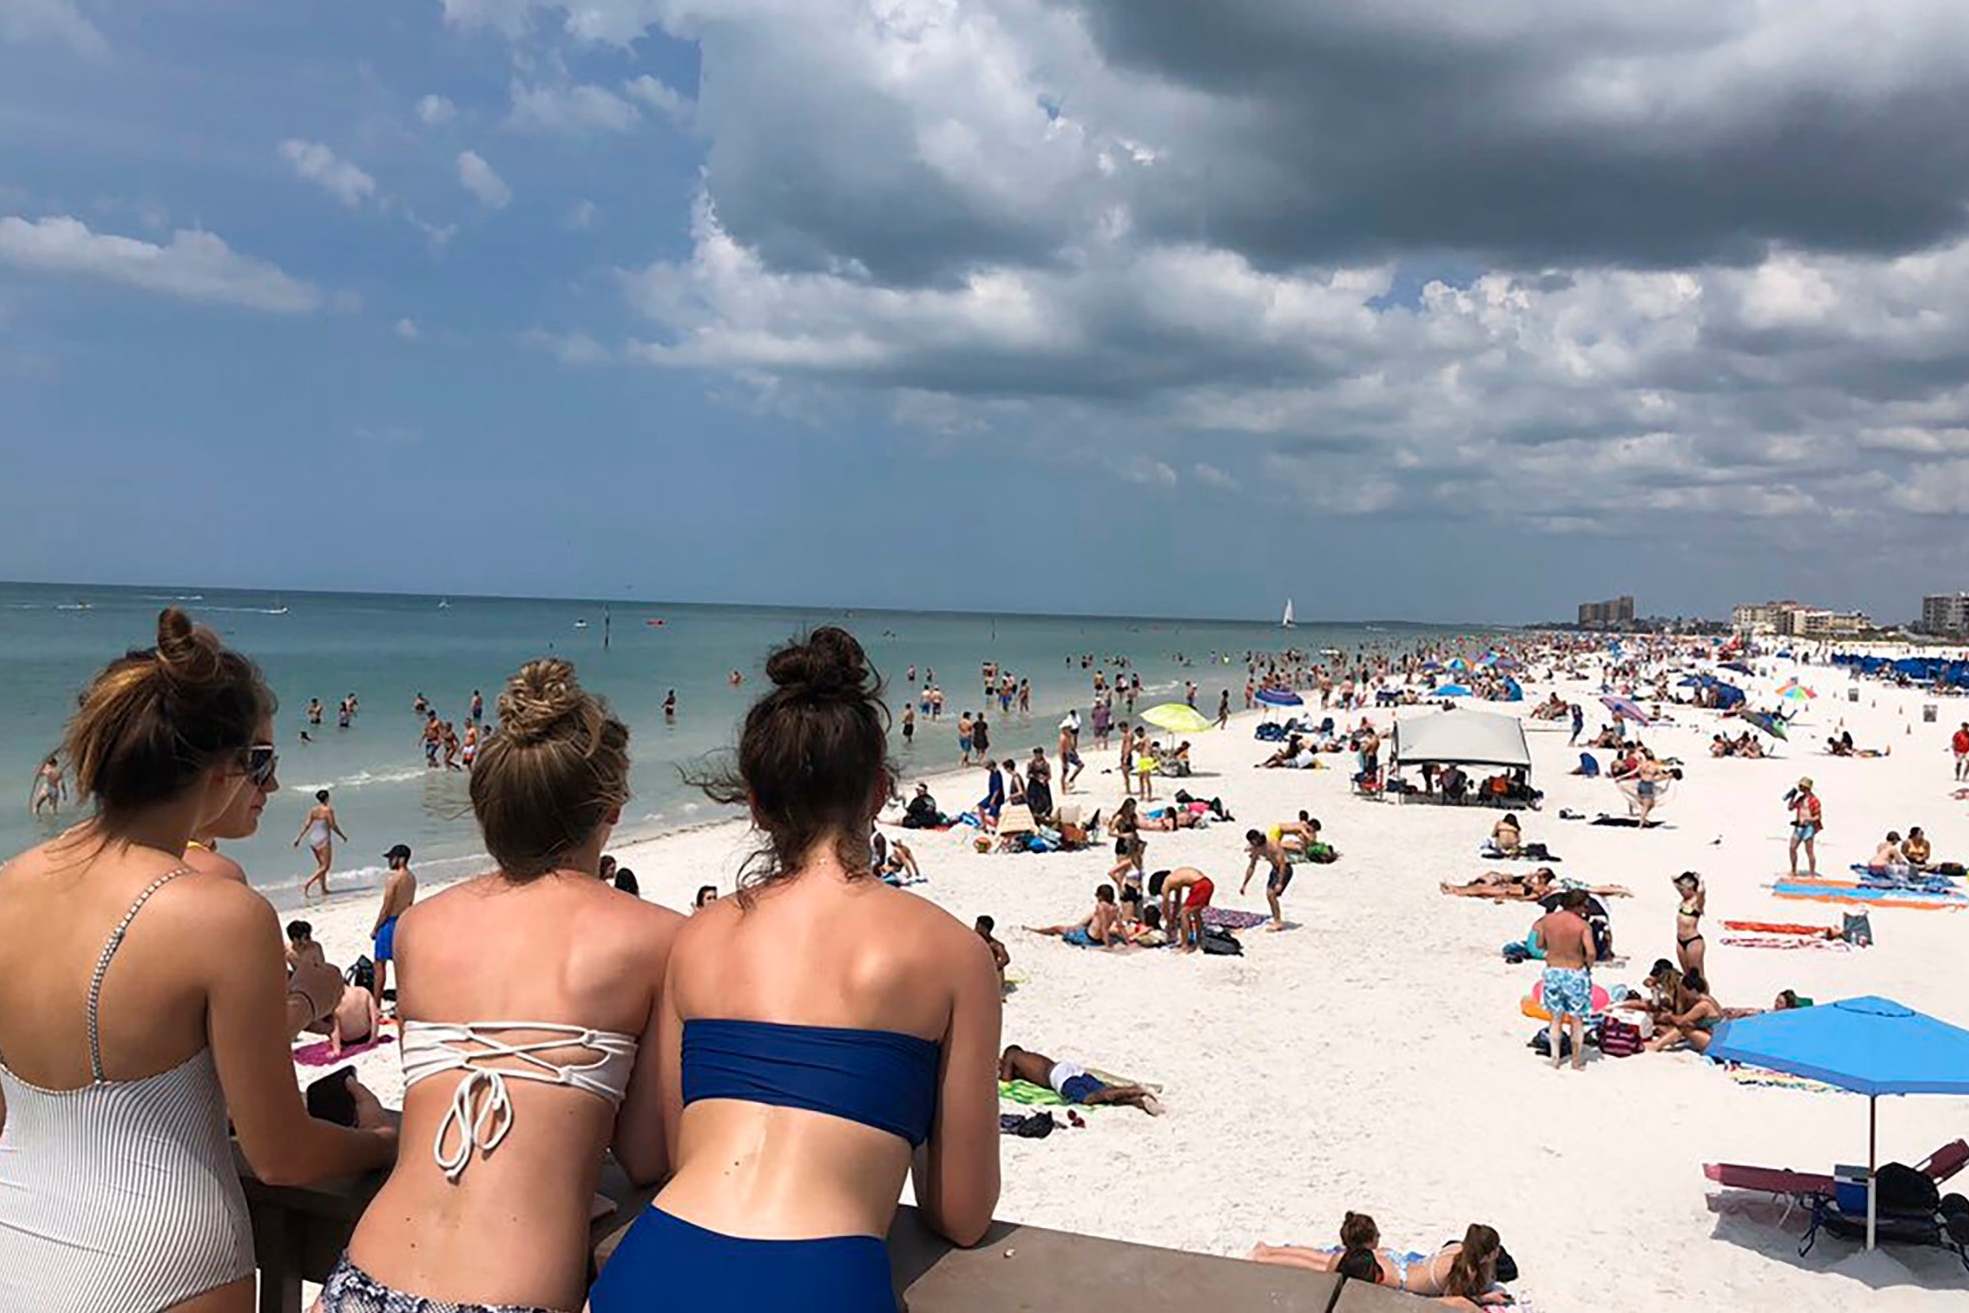 Spring breakers flocked to beaches in Florida